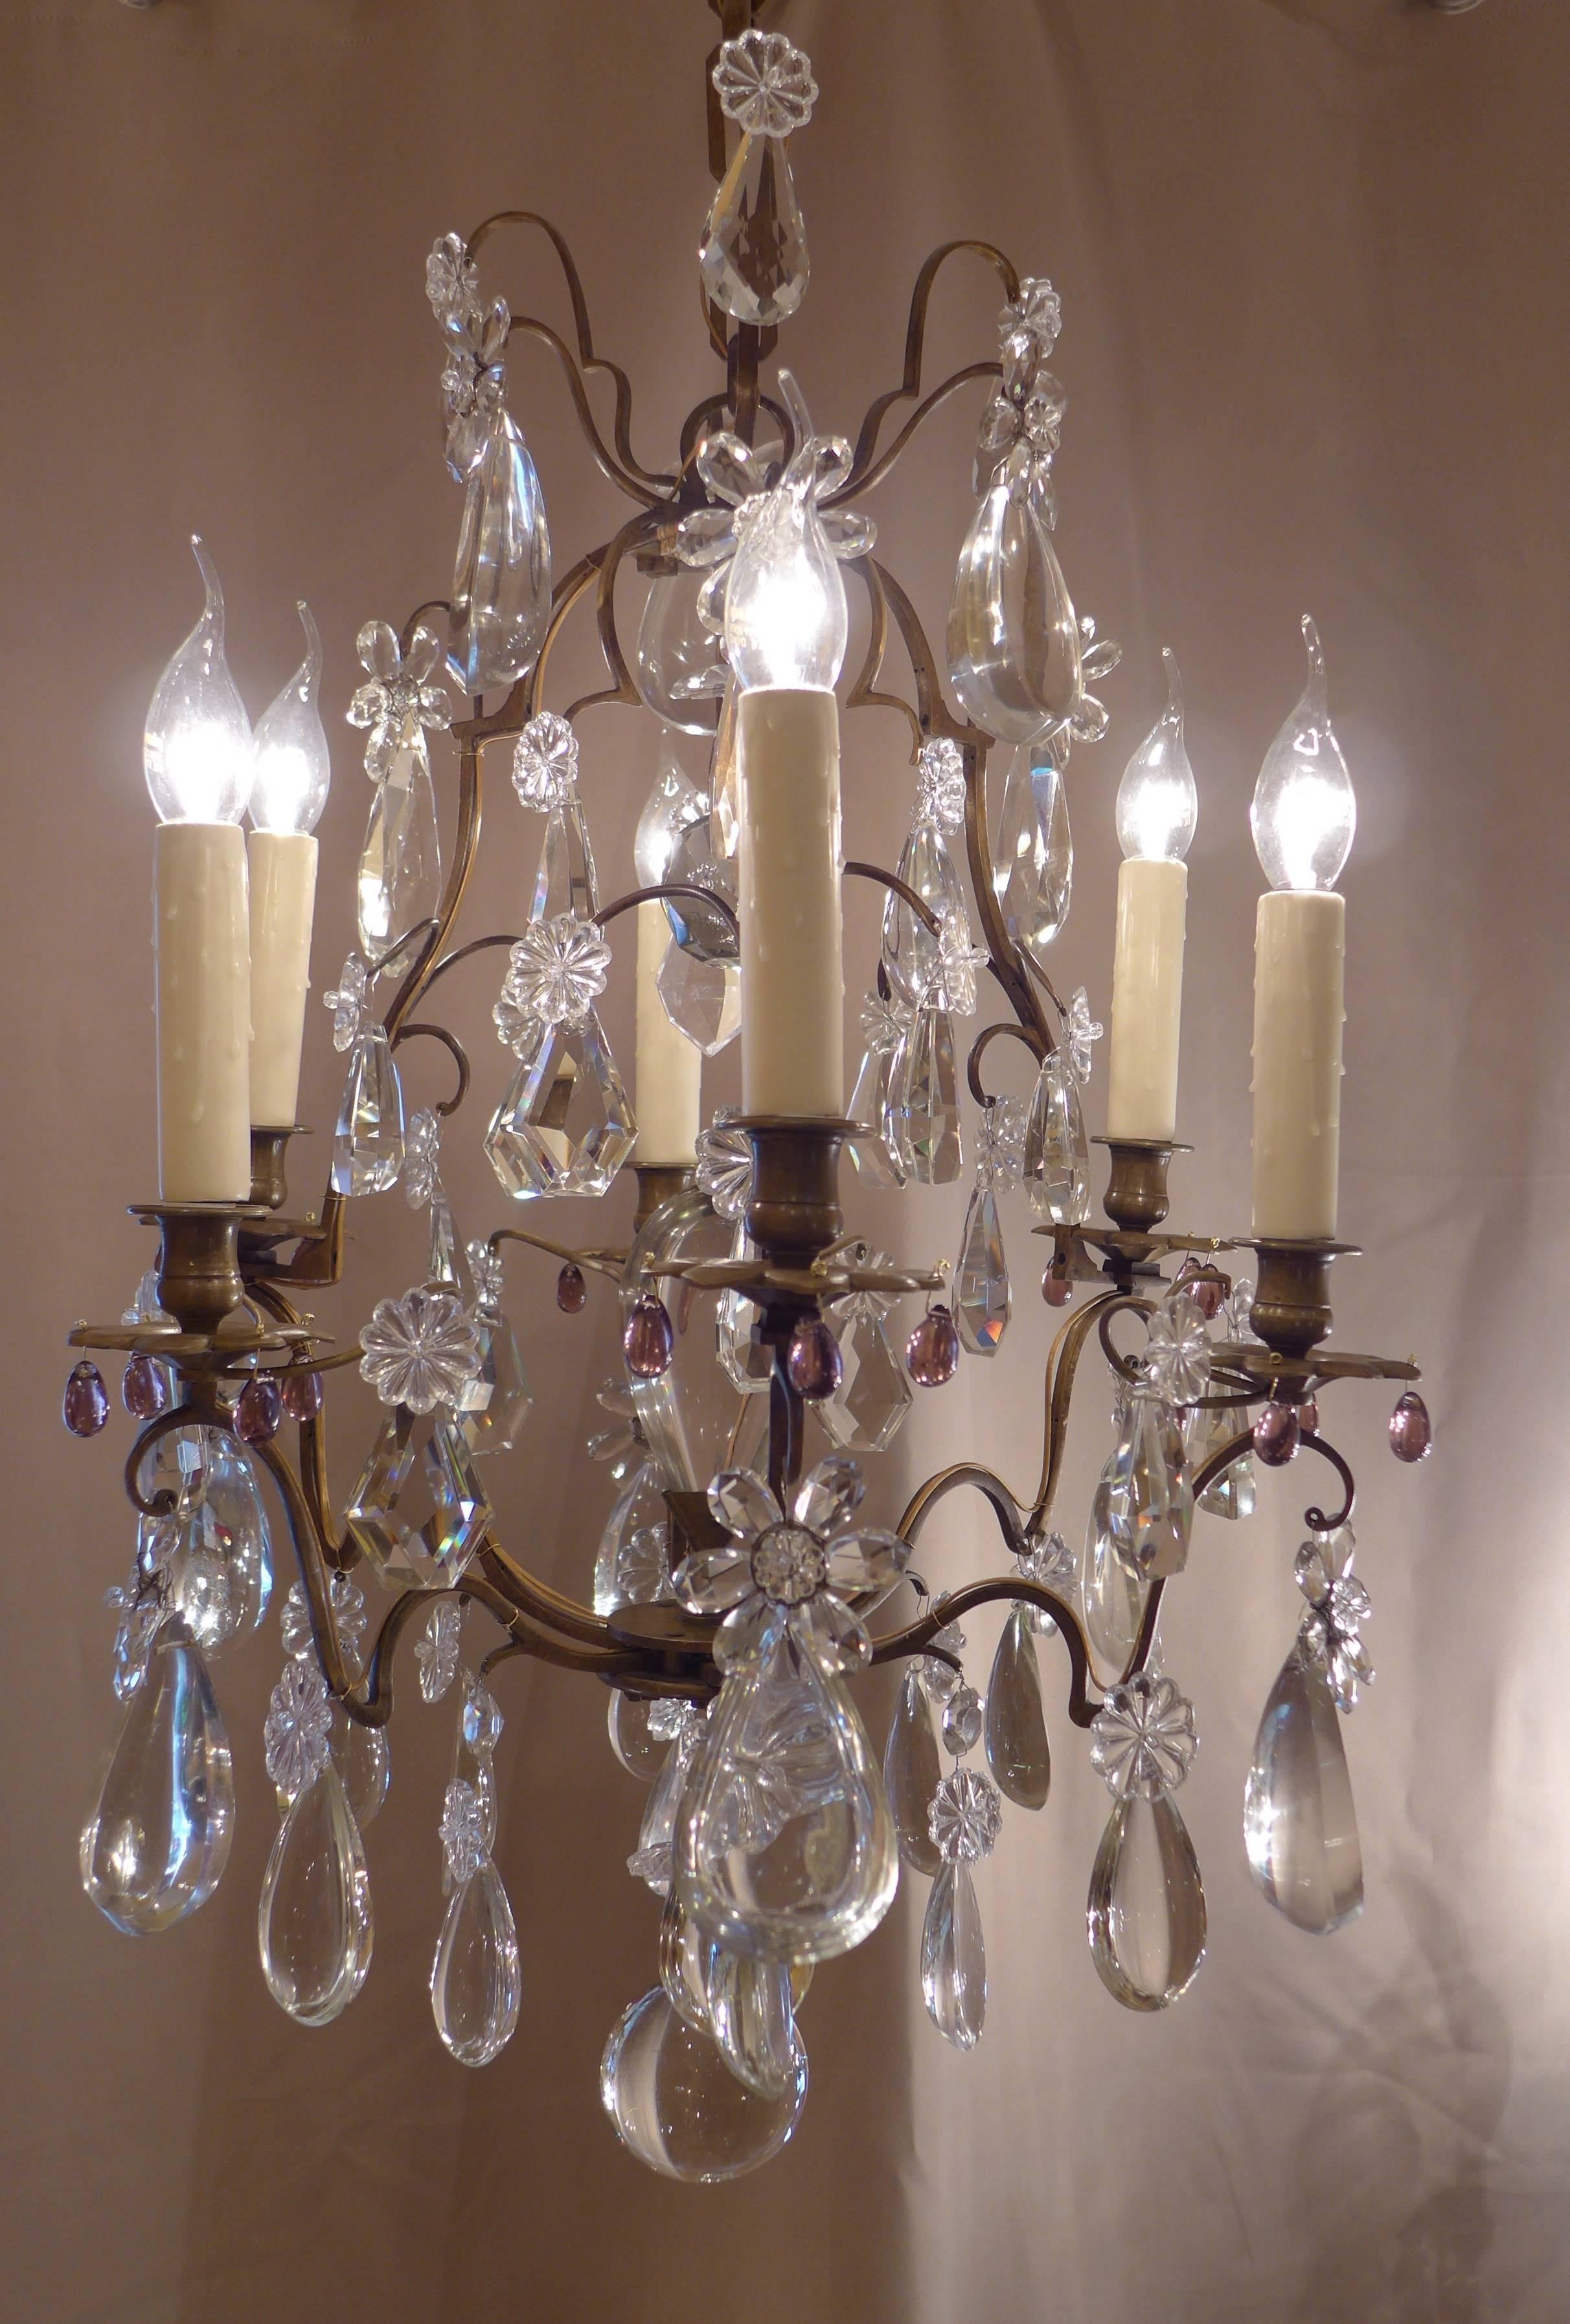 Lovely small patinated bronze and crystal form cage chandelier in the classical Louis XV style. The chandelier is composed of six arm lights. Interesting and gorgeous top quality crystal pieces, one central crystal half-pear, and crystal